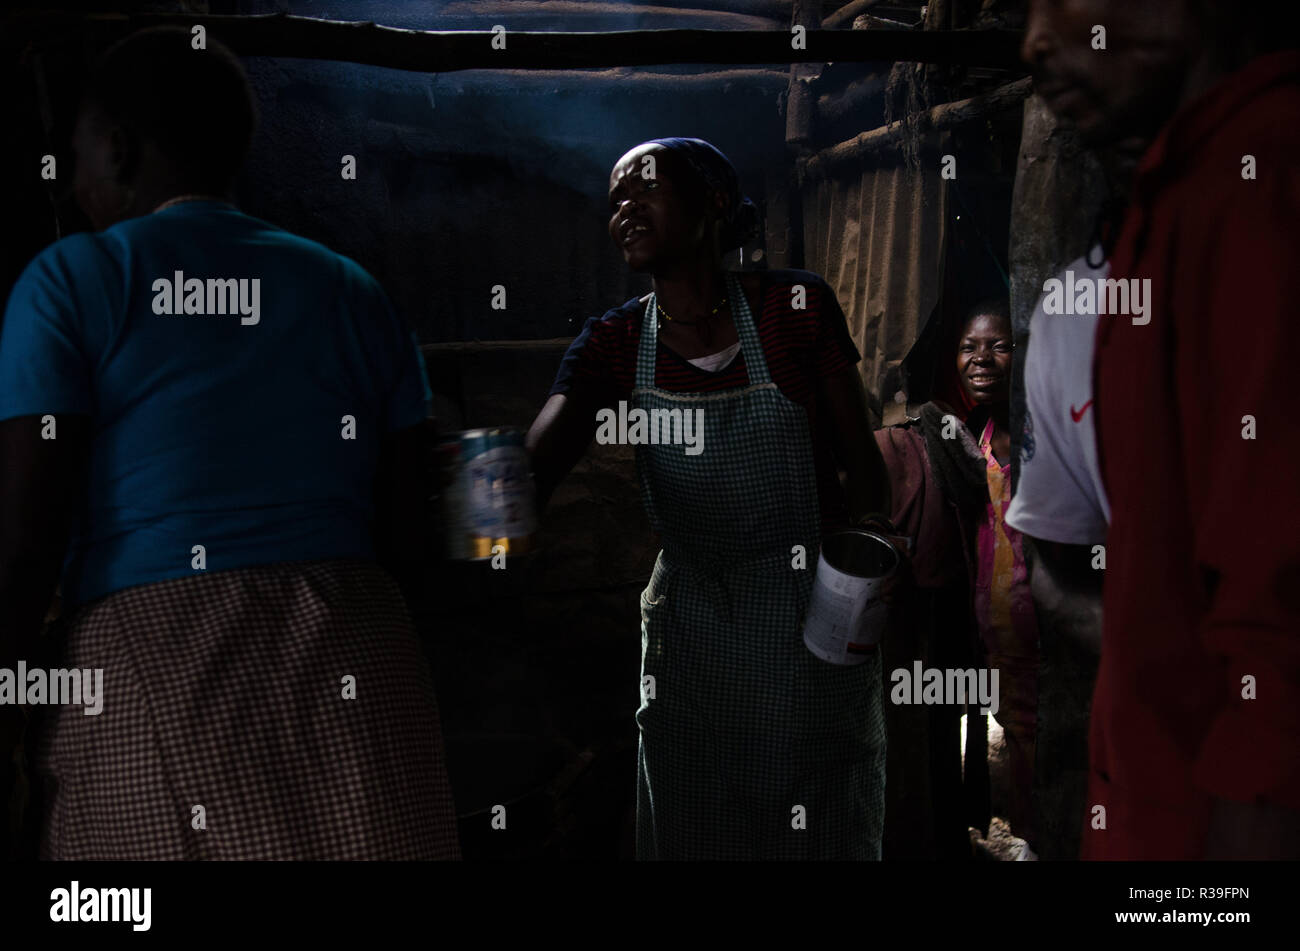 Kenya. 14th Nov, 2018. Women are seen at a local bar selling alcohol in kibera.For a long period of time, most women from Kibera slums have been under the influence of Alcohol. Not considering the side effects, women here consume it for different reasons including taking over stress and forgetting about their family problems back home. This is due to lack of enough job opportunities and support from their husbands.The high level of alcohol consumption has led to higher rate of deaths, blindness, and risk of many dangerous diseases such as cancer, hypertension, stroke and traumatic injuri Stock Photo